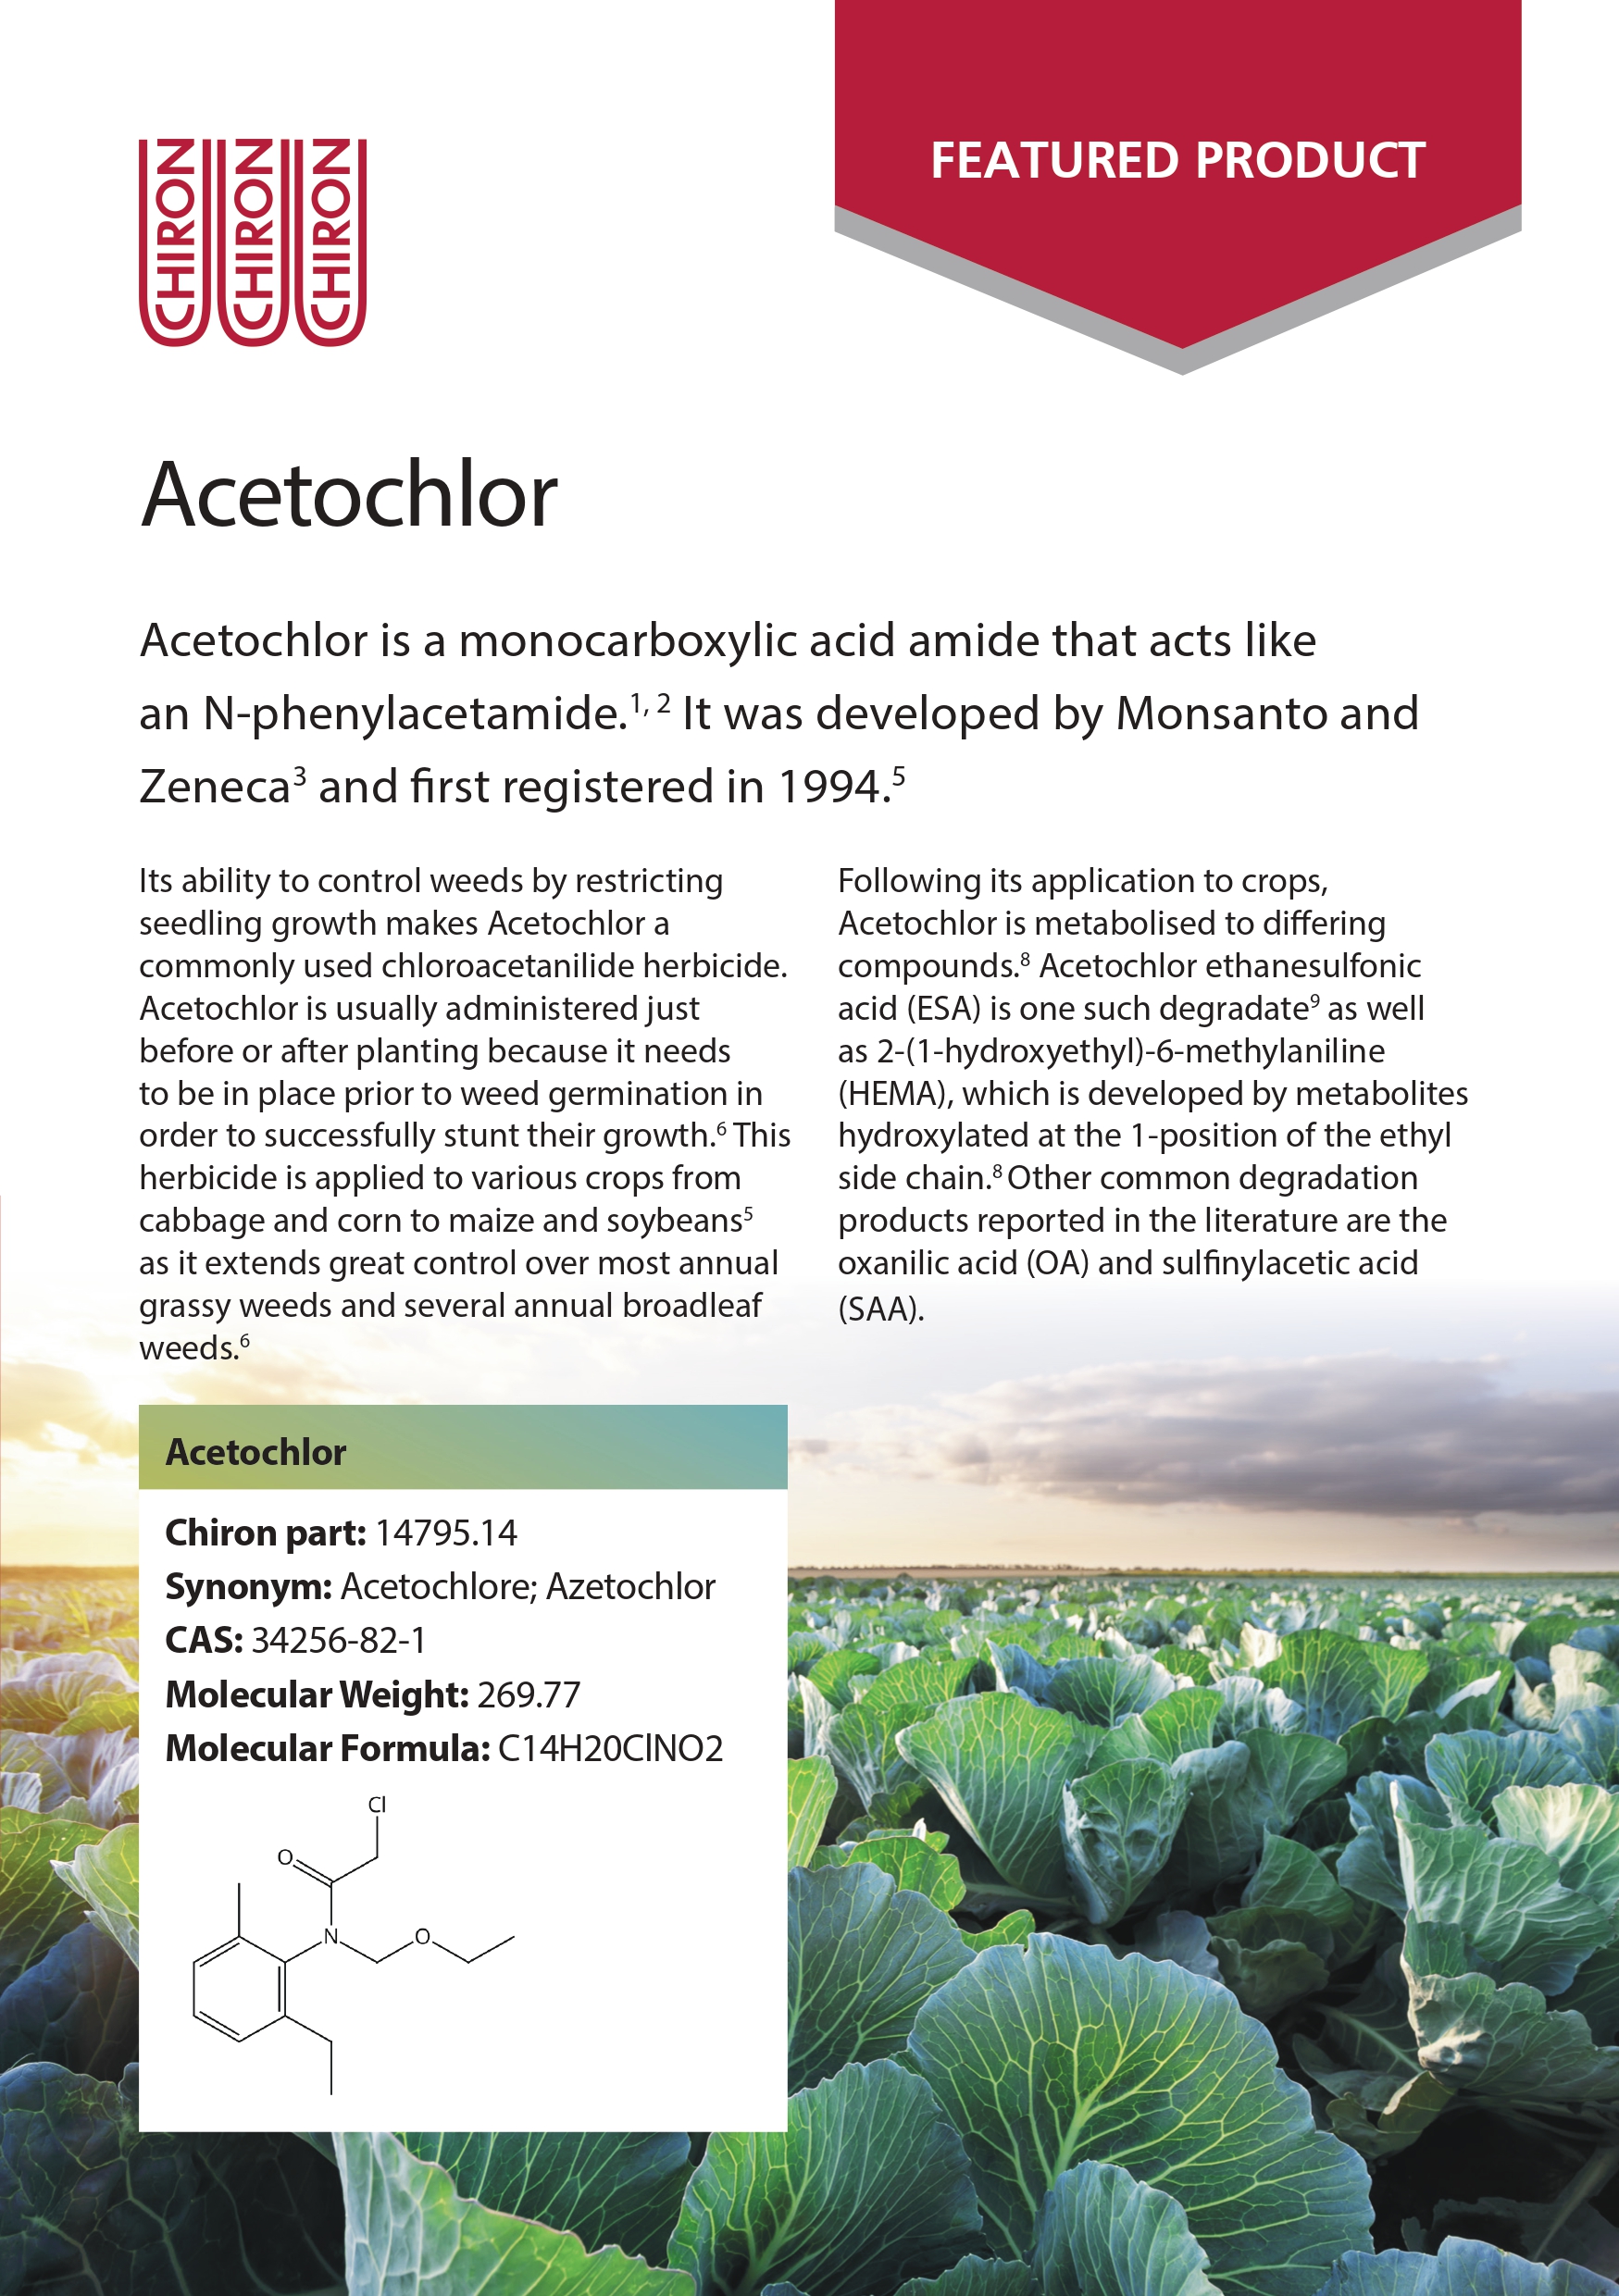 Featured product: Acetochlor